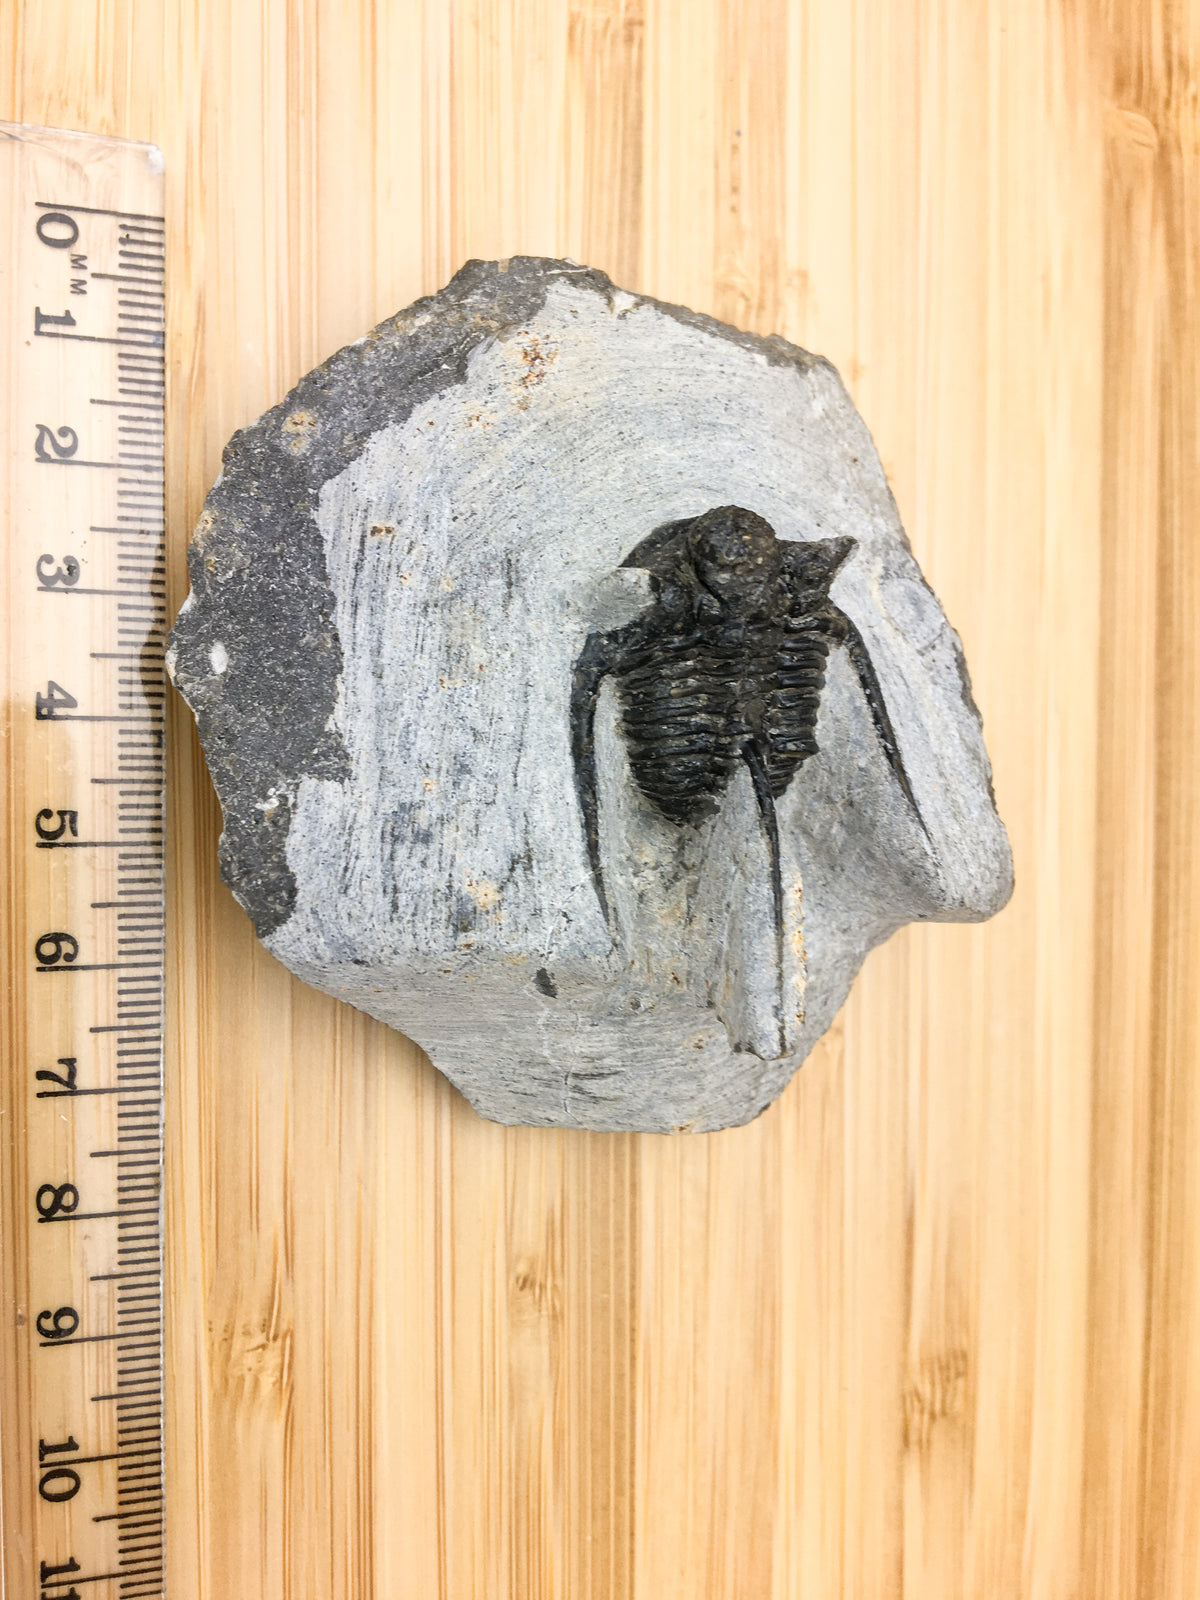 overhead view of Ontarion trilobite next to ruler. The fossil is mostly complete but has damage to the left pre glabellar and glabellar and is missing the left plural spine. The sample in limestone  measures approximately 8cm